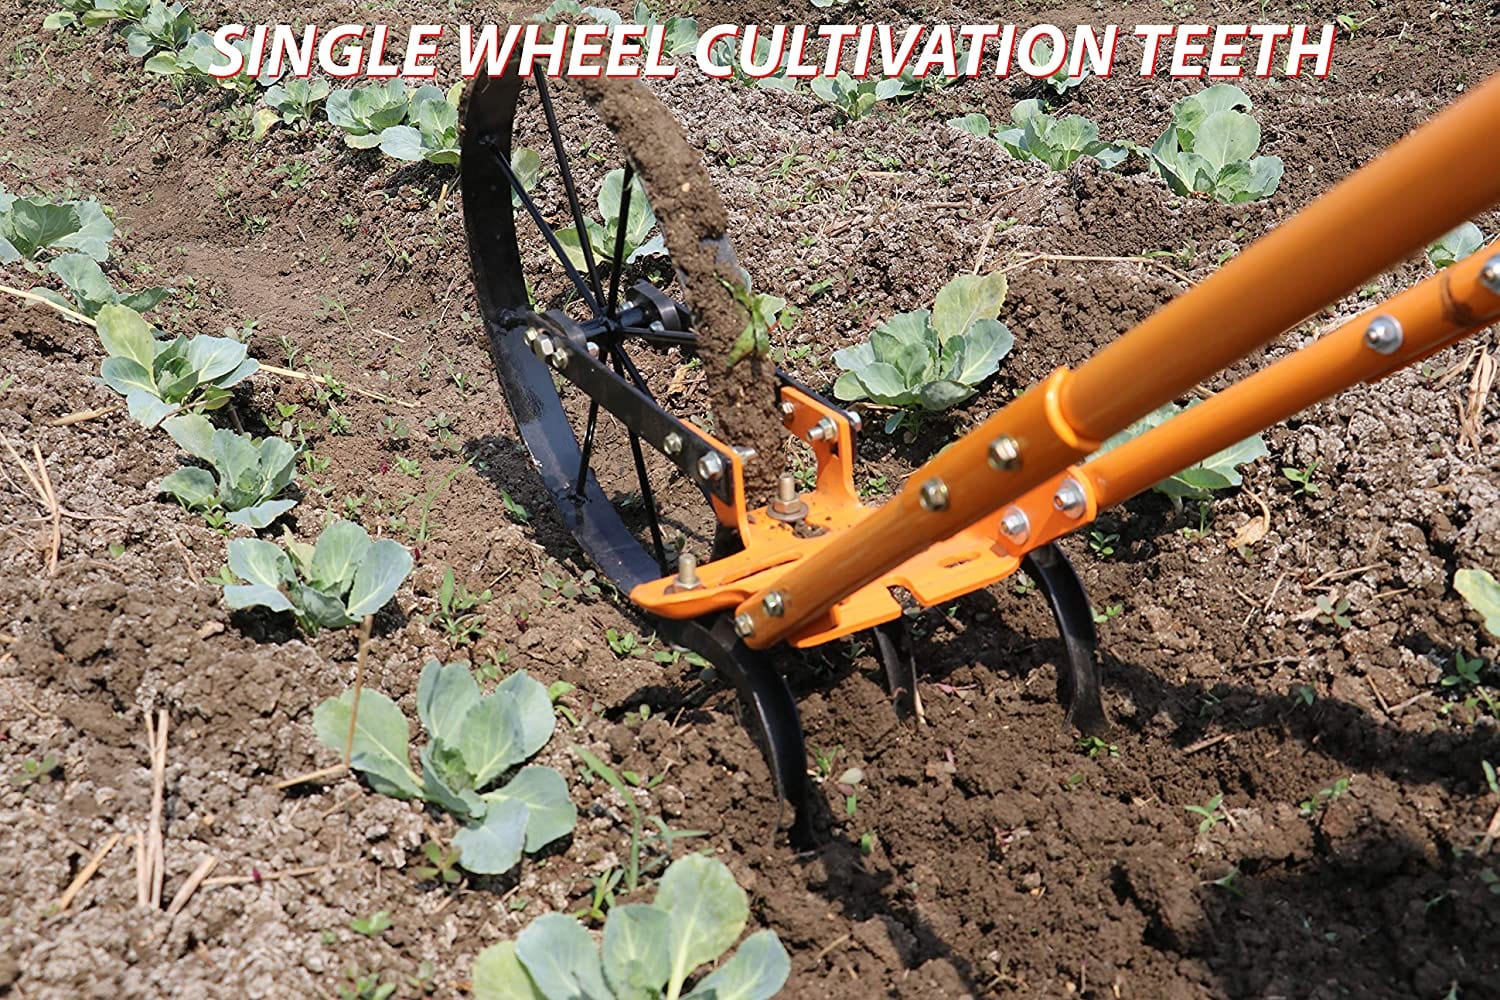 Mahan Manual Wheel Hoe with Oscillating Hoe (With Pilow and Cultivator Teeth)